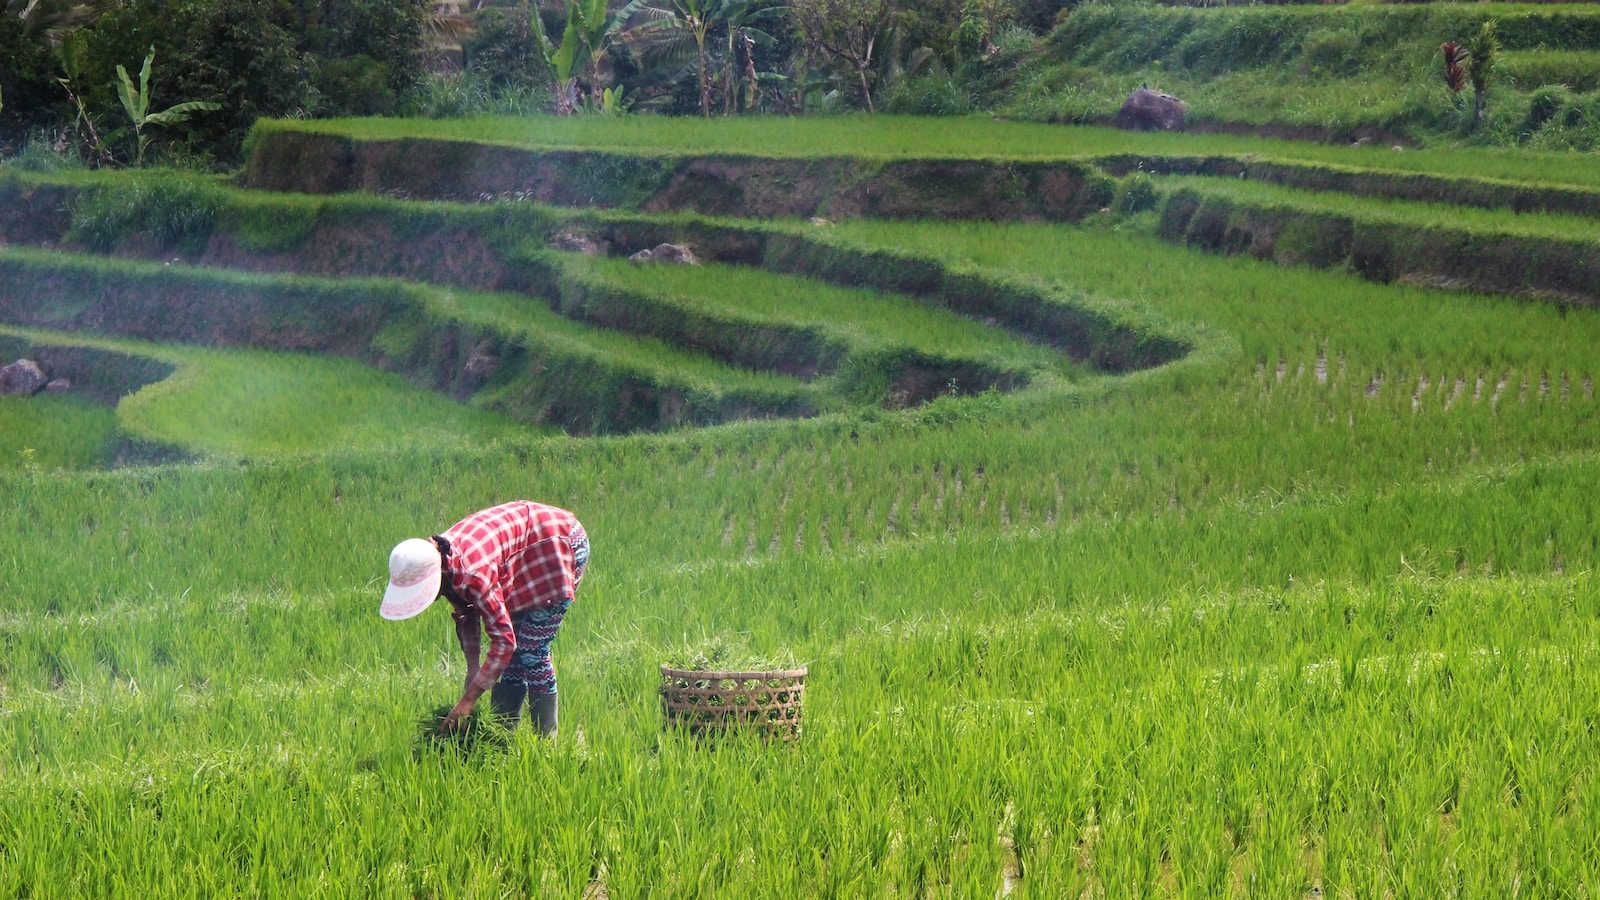 person planting rice on field during daytime